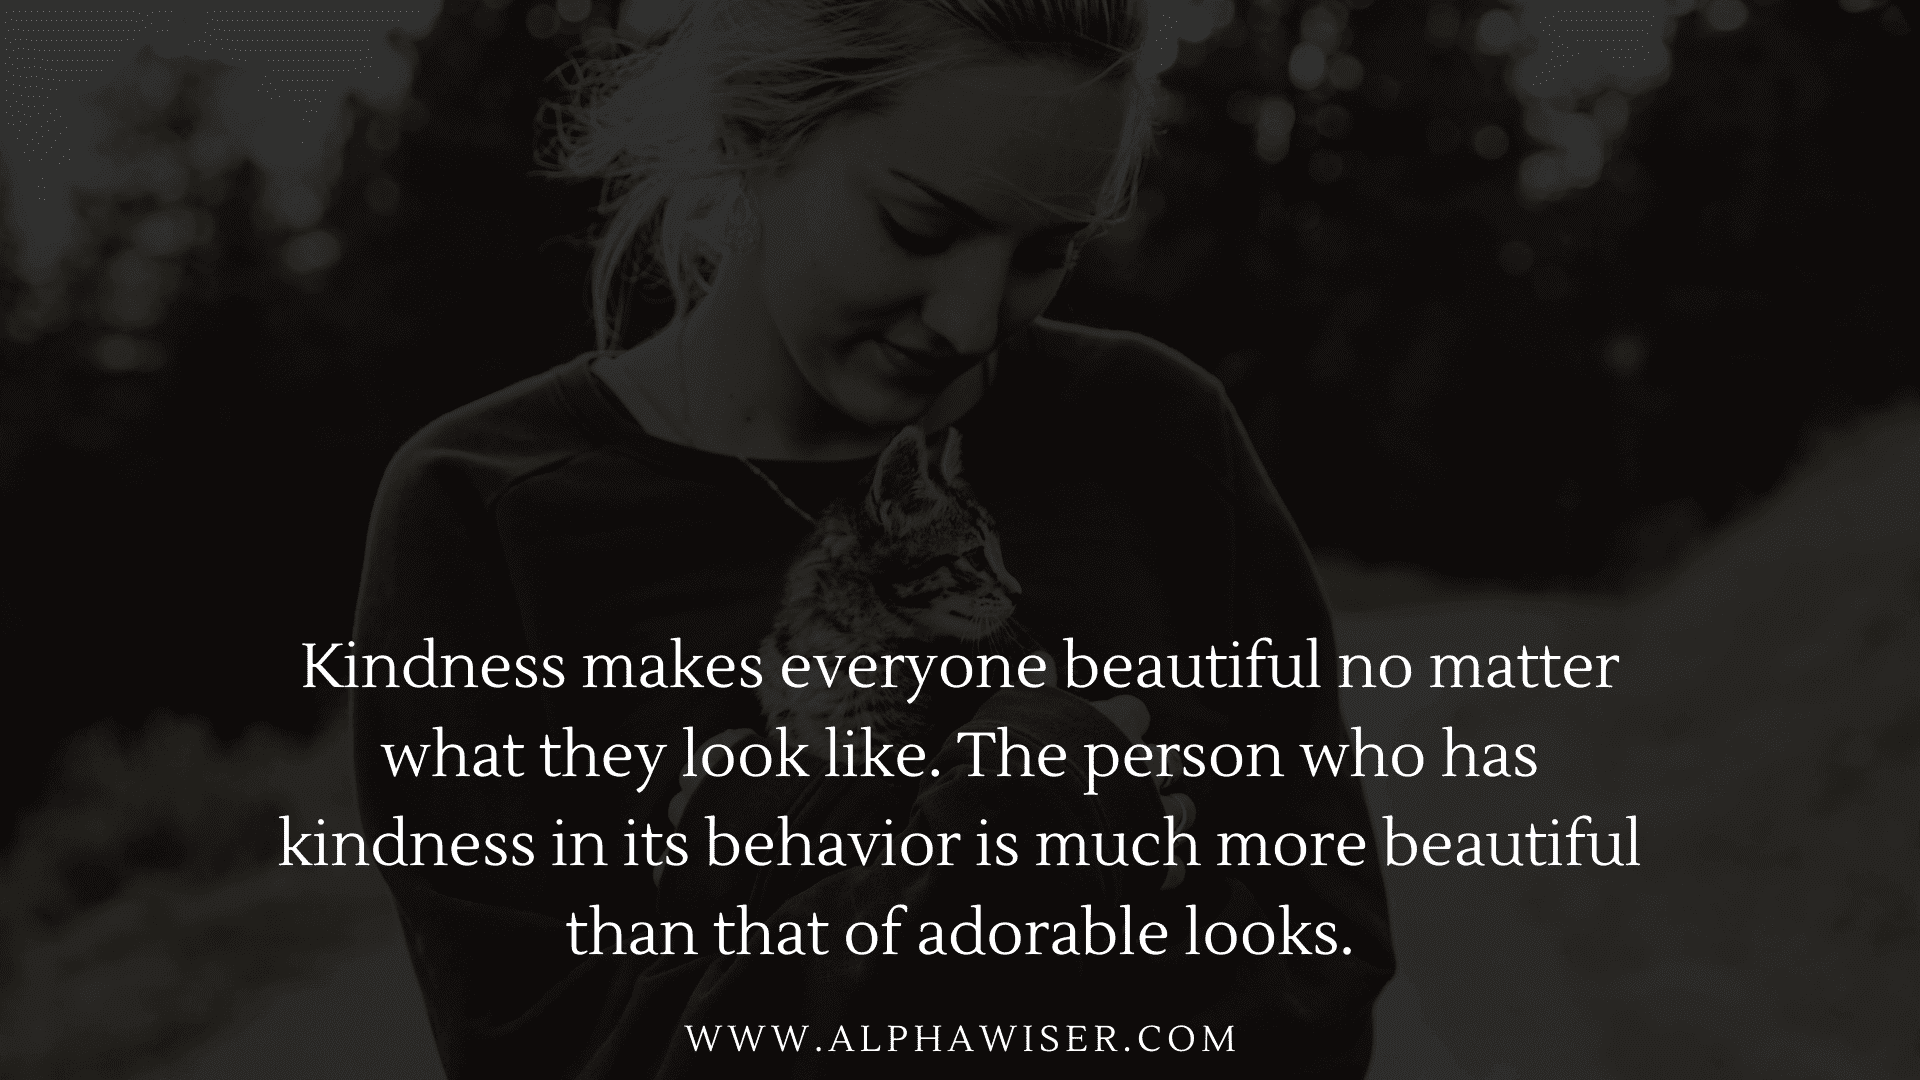 Kindness makes everyone beautiful no matter what they look like